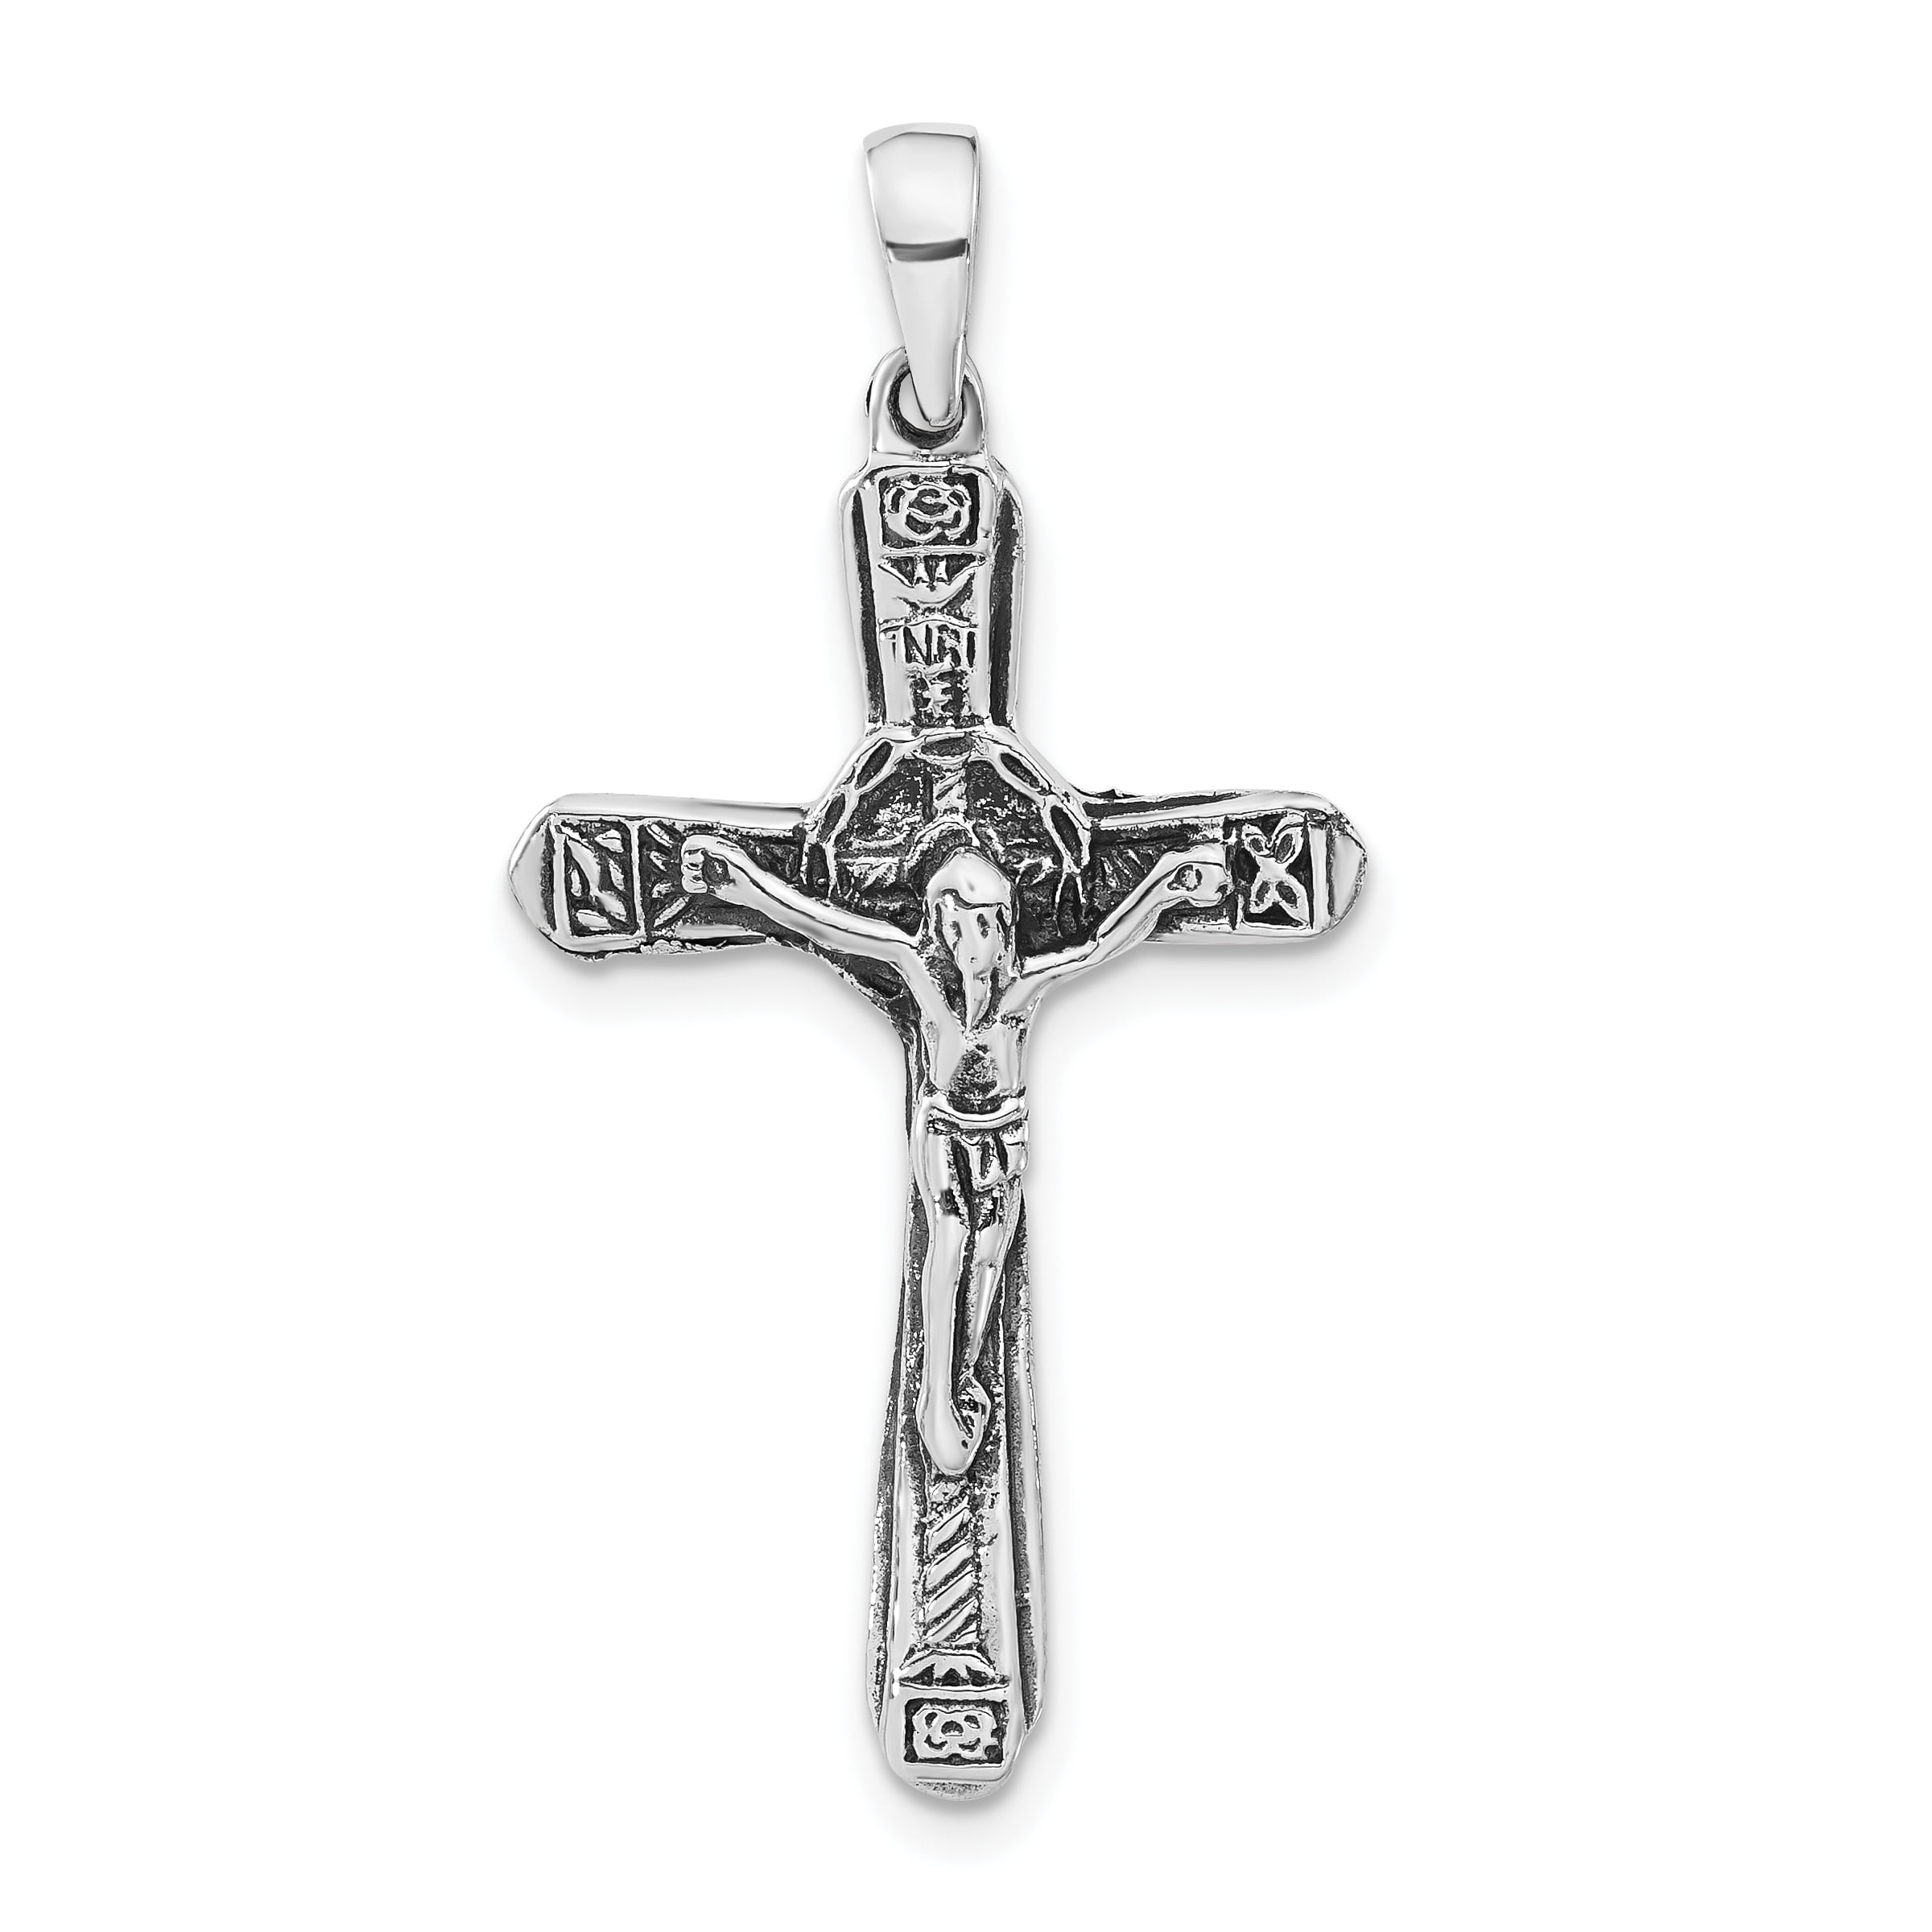 925 Sterling Silver Polished Antiqued Cross Charm Pendant 31mm x 20mm 